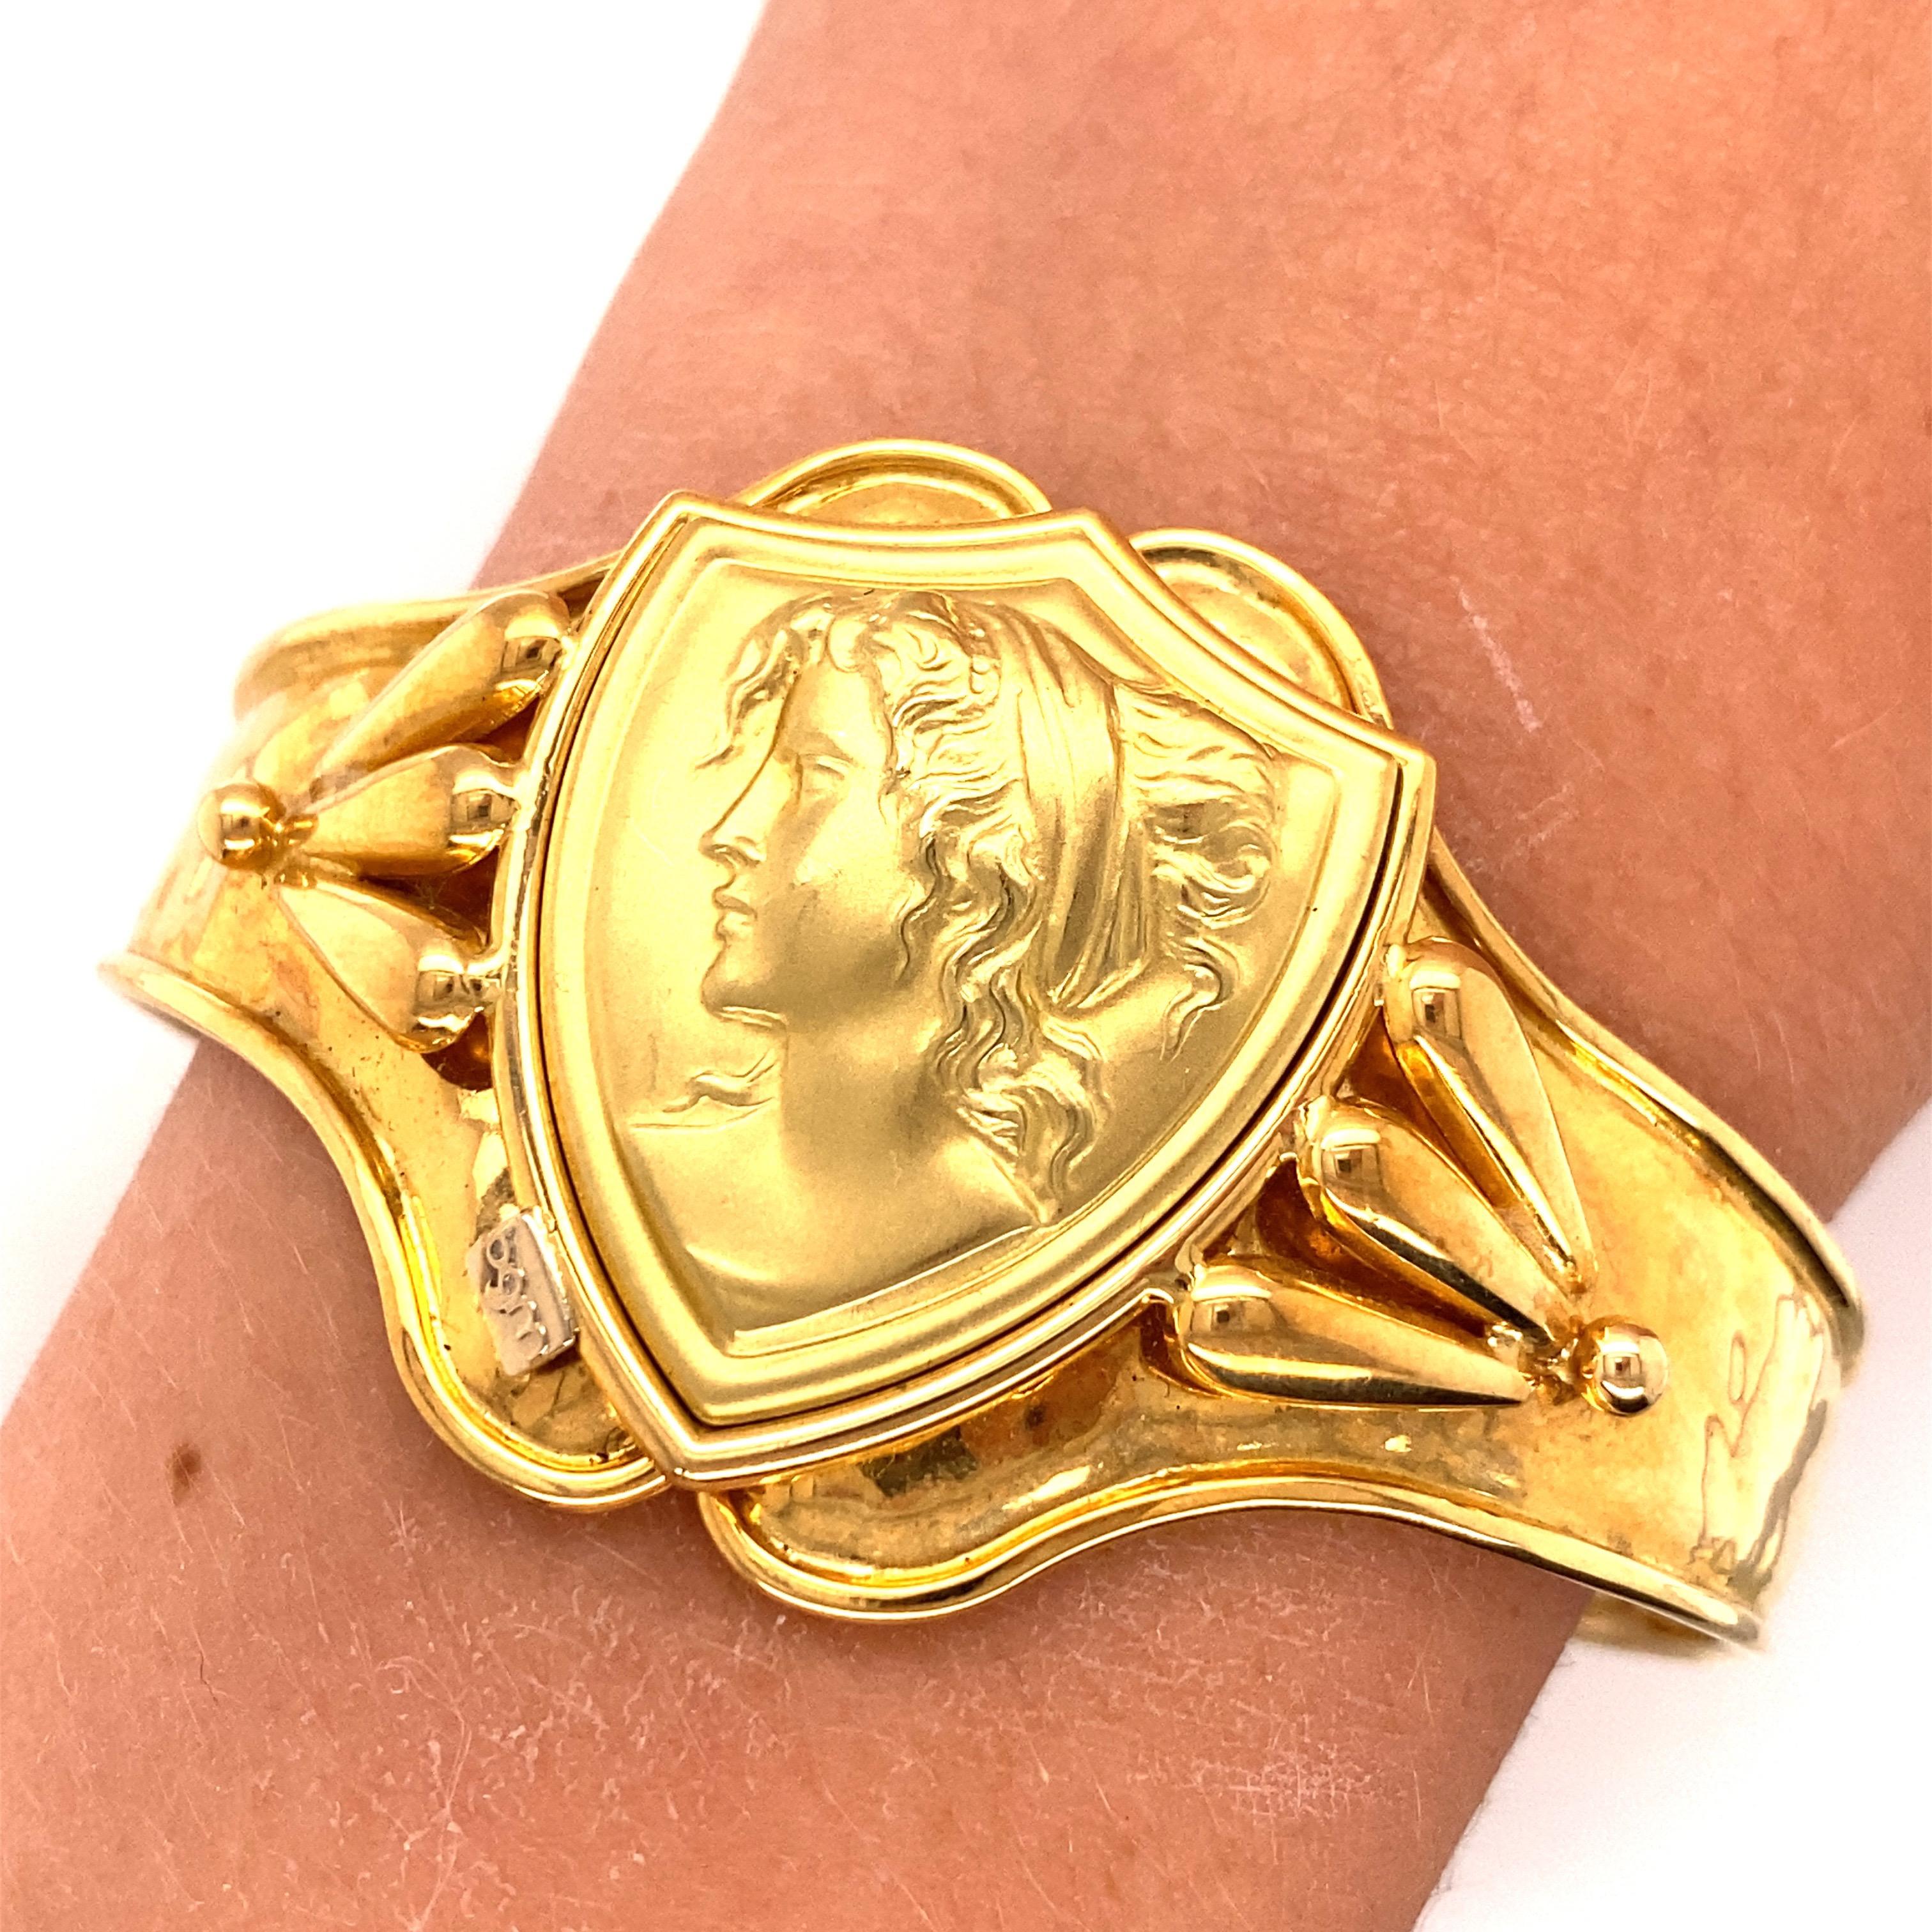 Vintage 18K Yellow Gold Cuff Bracelet with Woman Figure on a Shield 1